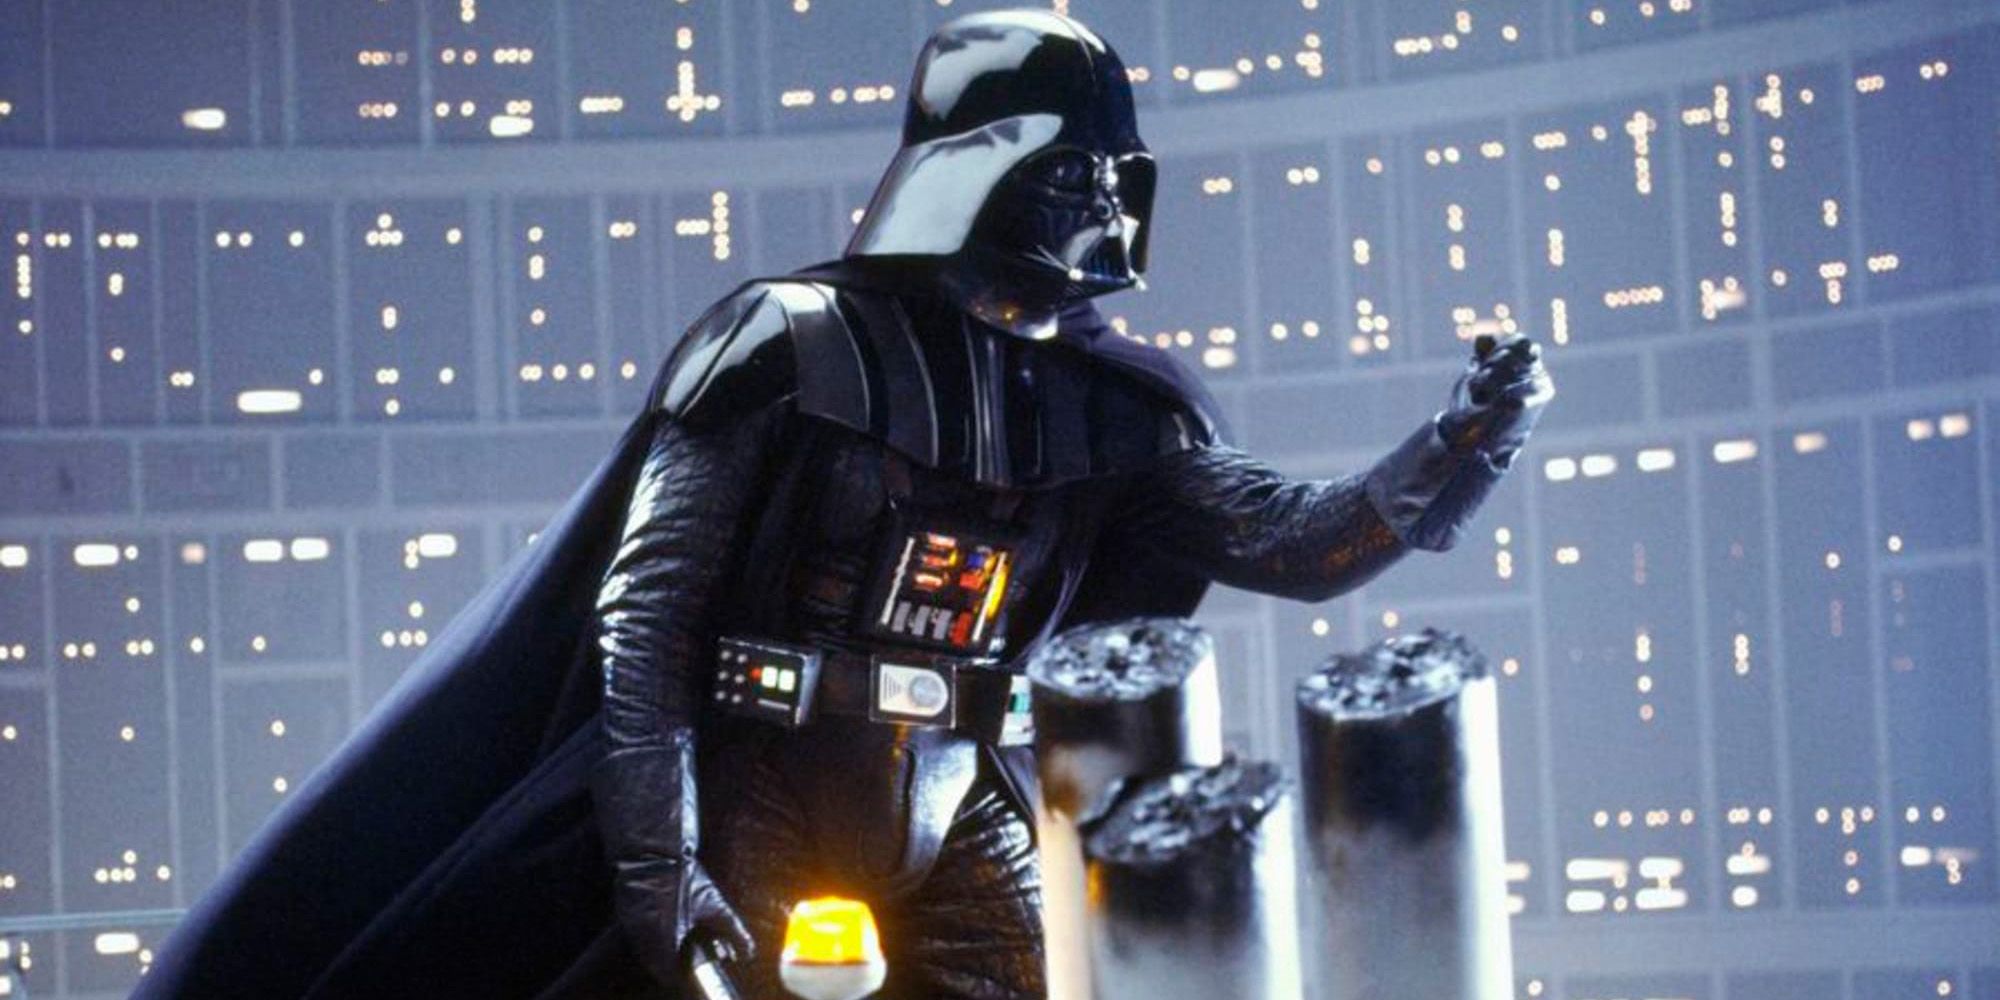 Darth Vader on the Death Star in Star Wars Return of the Jedi.